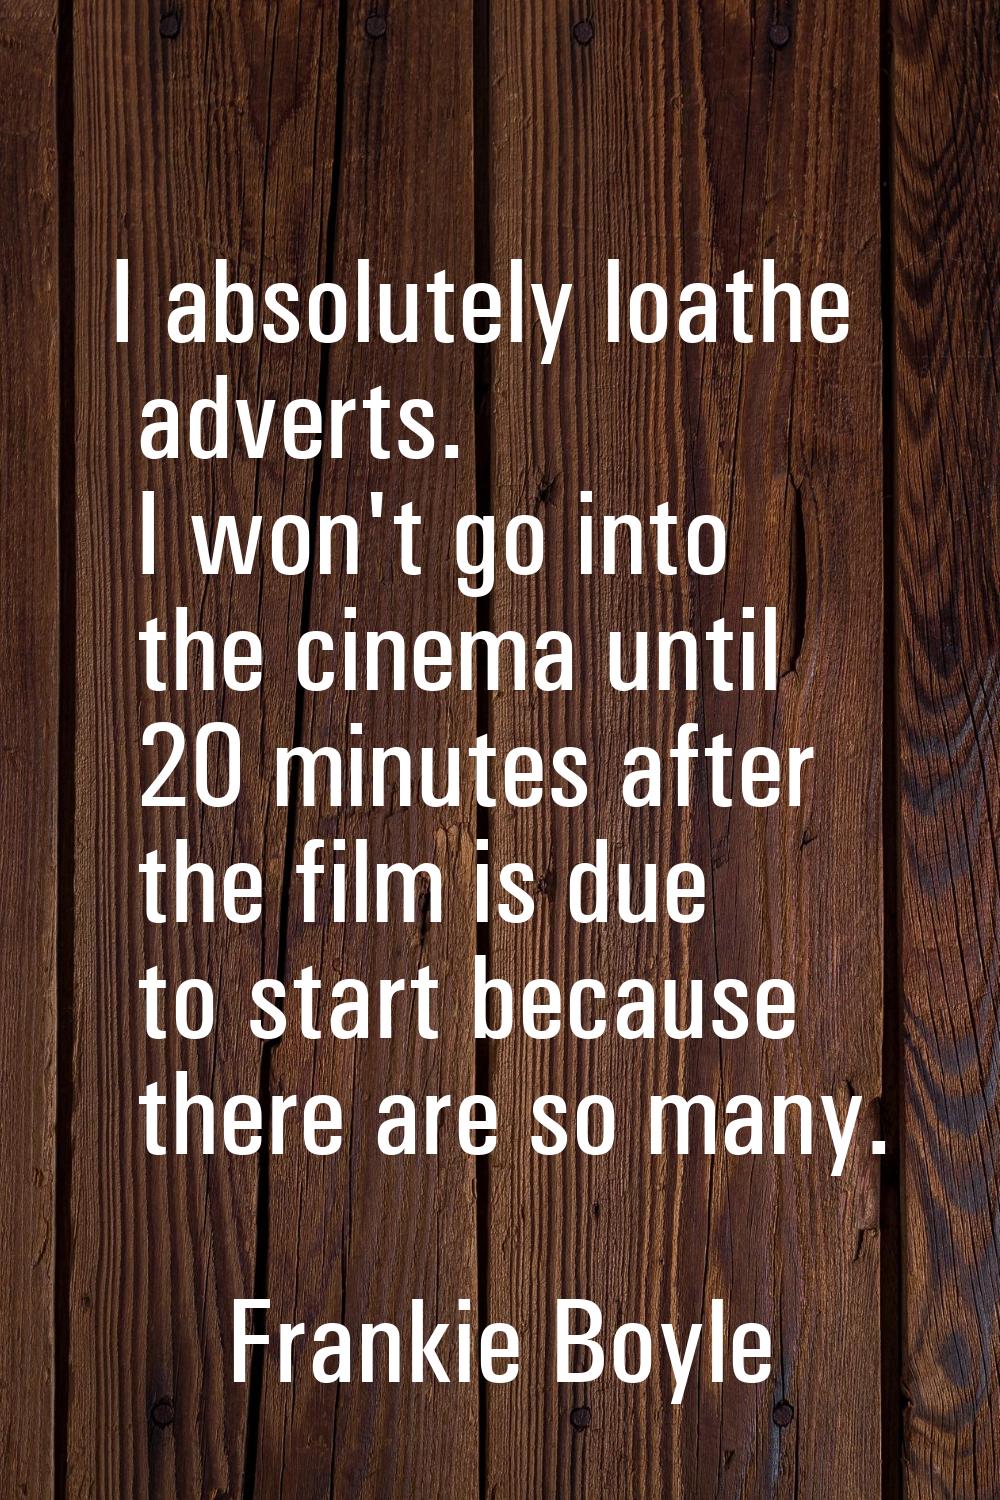 I absolutely loathe adverts. I won't go into the cinema until 20 minutes after the film is due to s